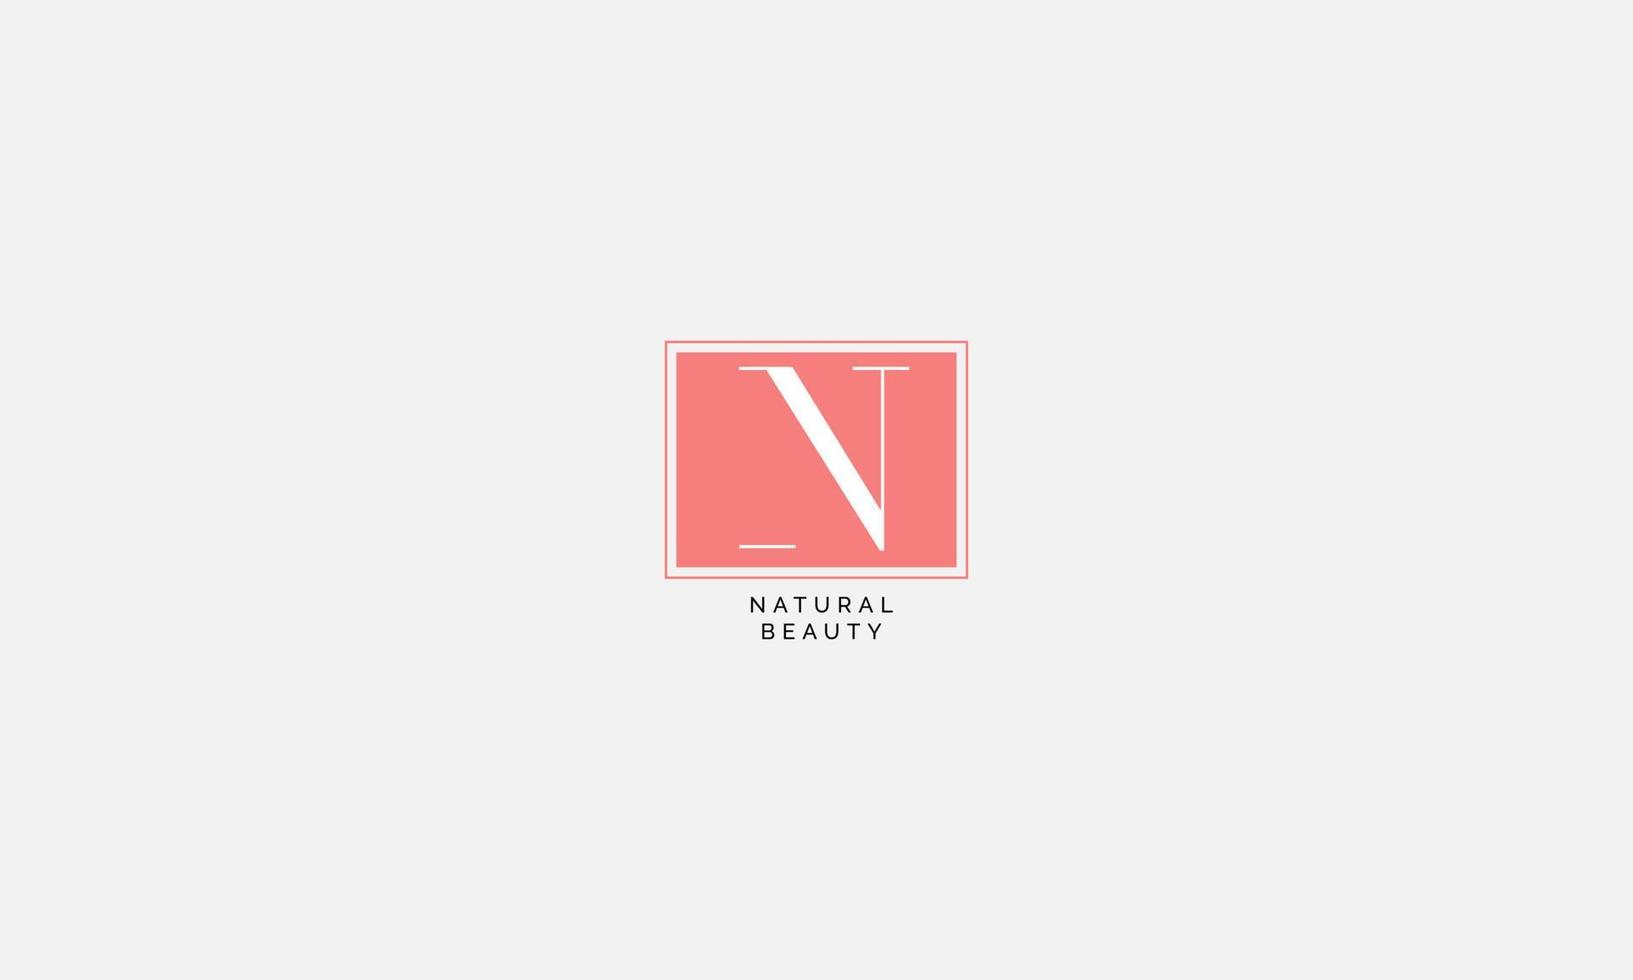 Abstract letter N logo design template with beauty industry and fashion logo vector